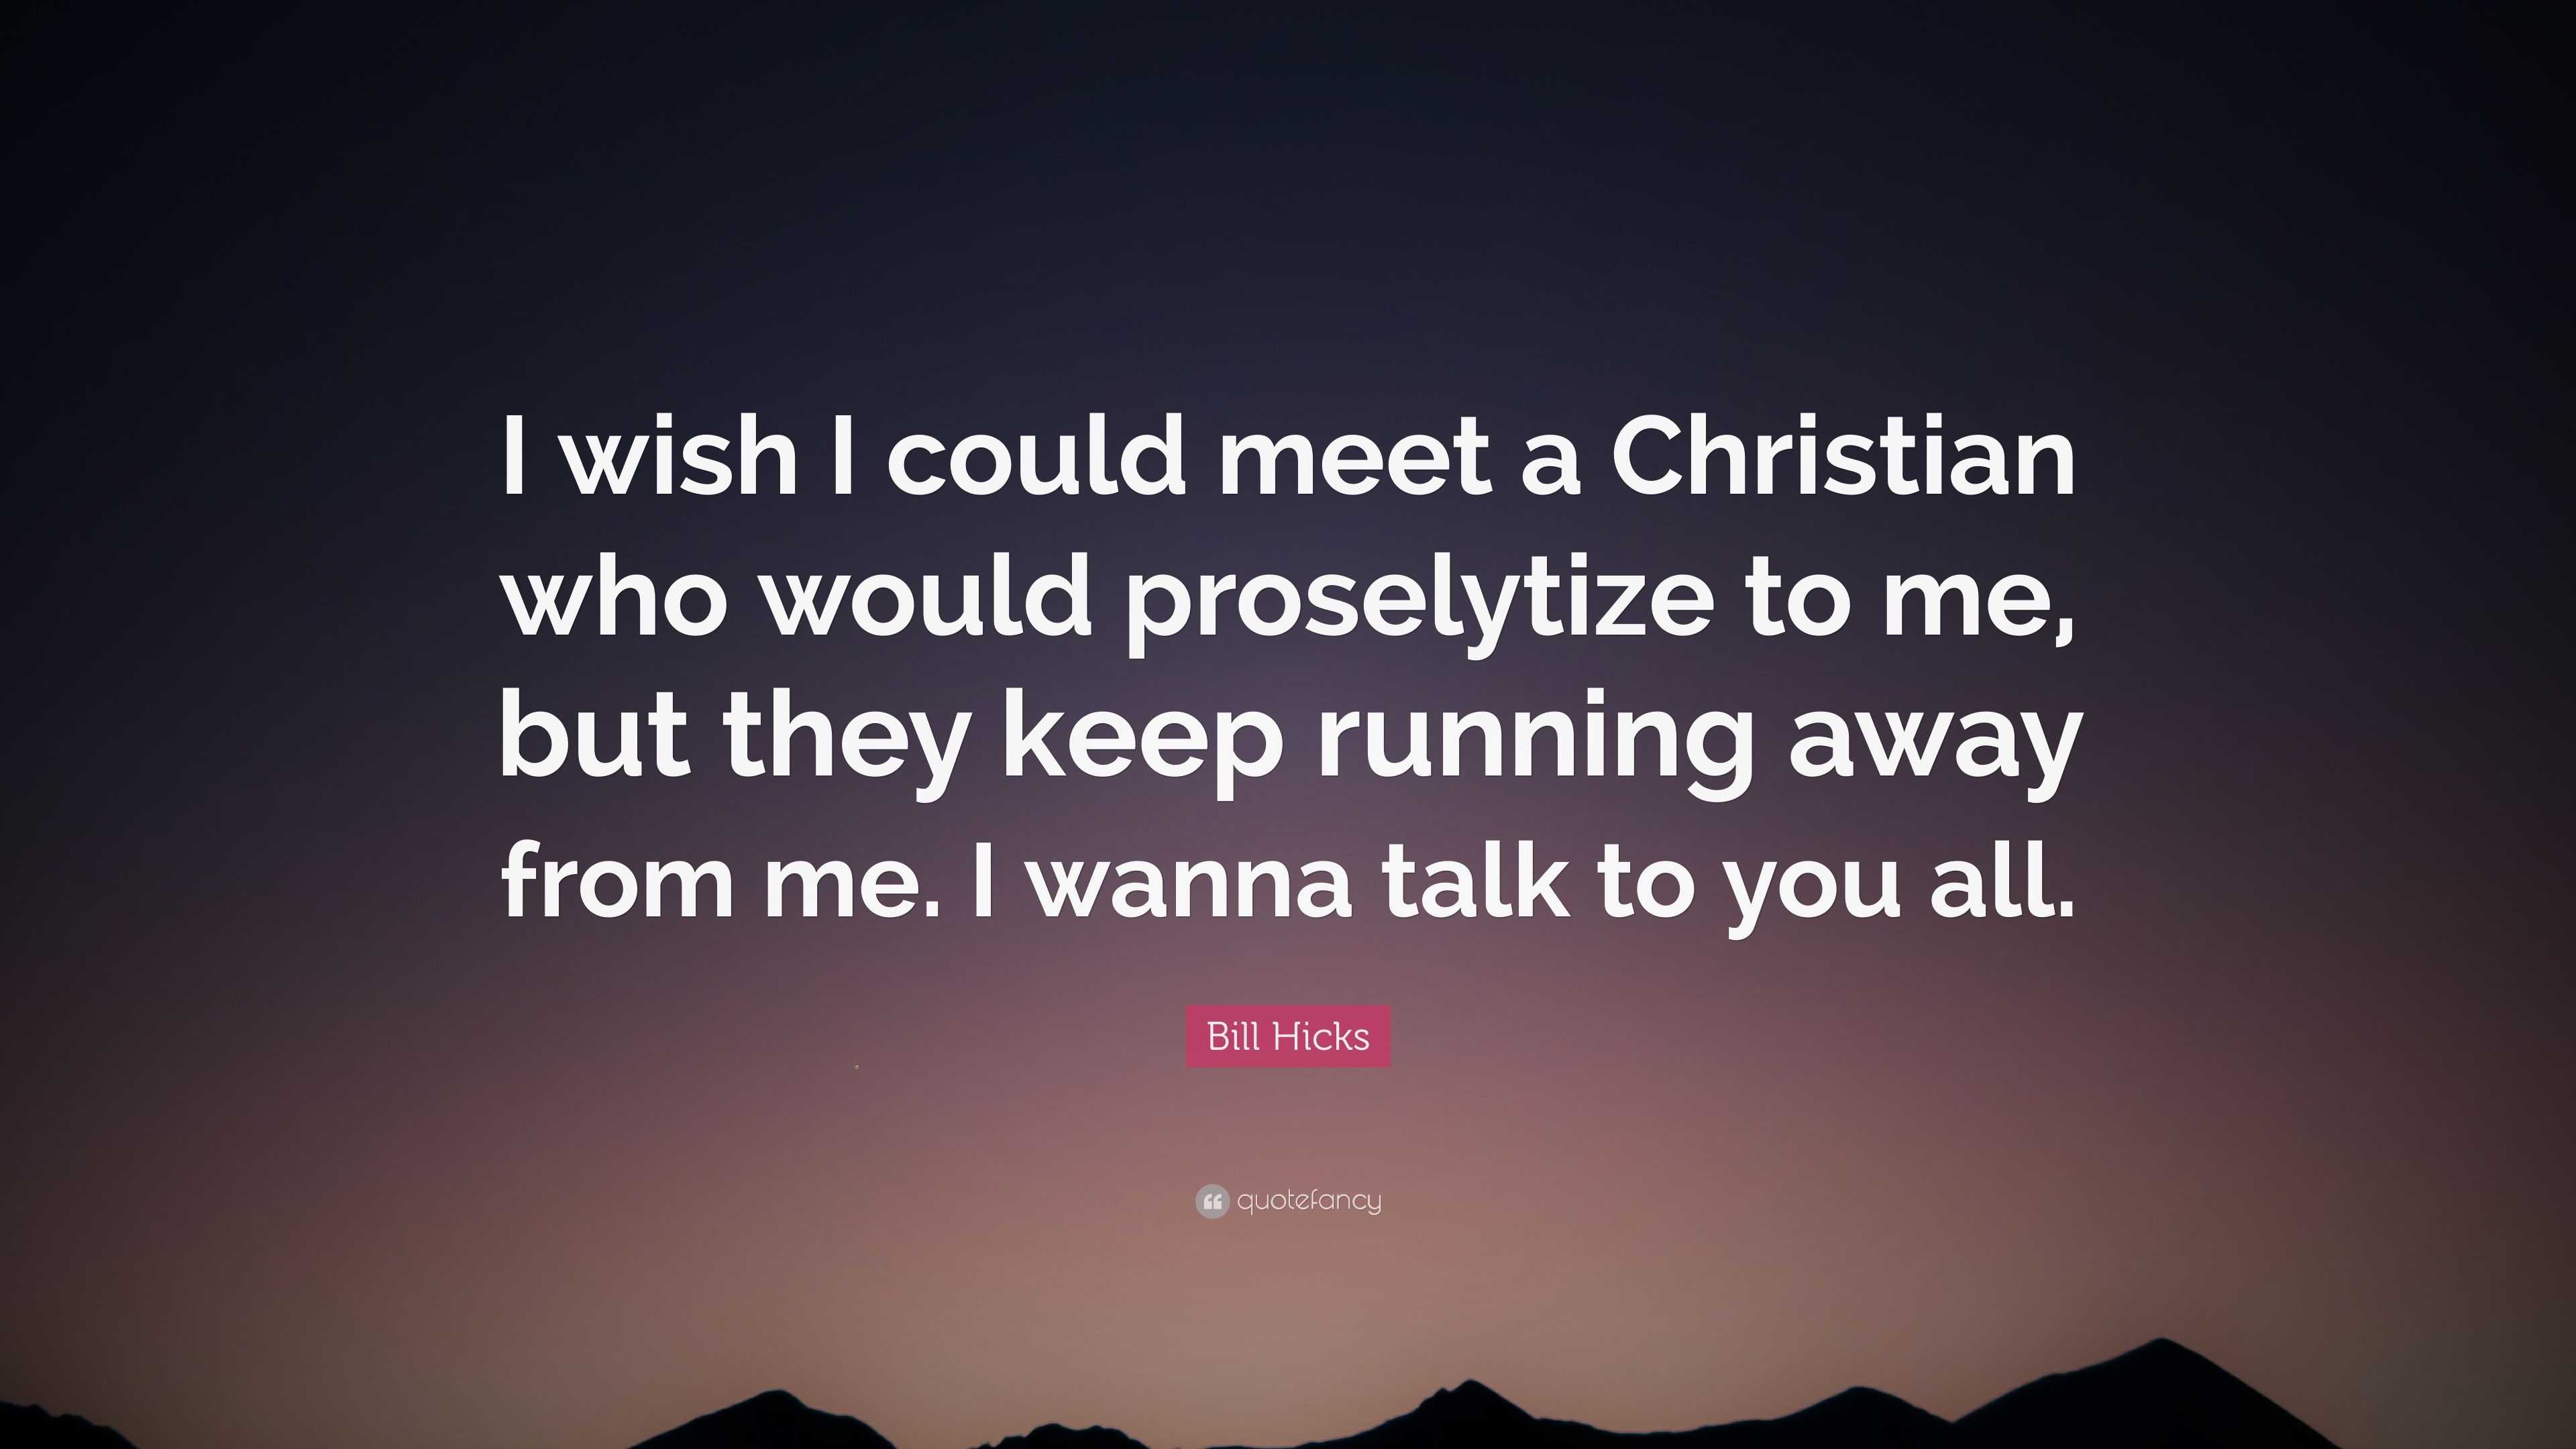 Bill Hicks Quote: “I wish I could meet a Christian who would ...